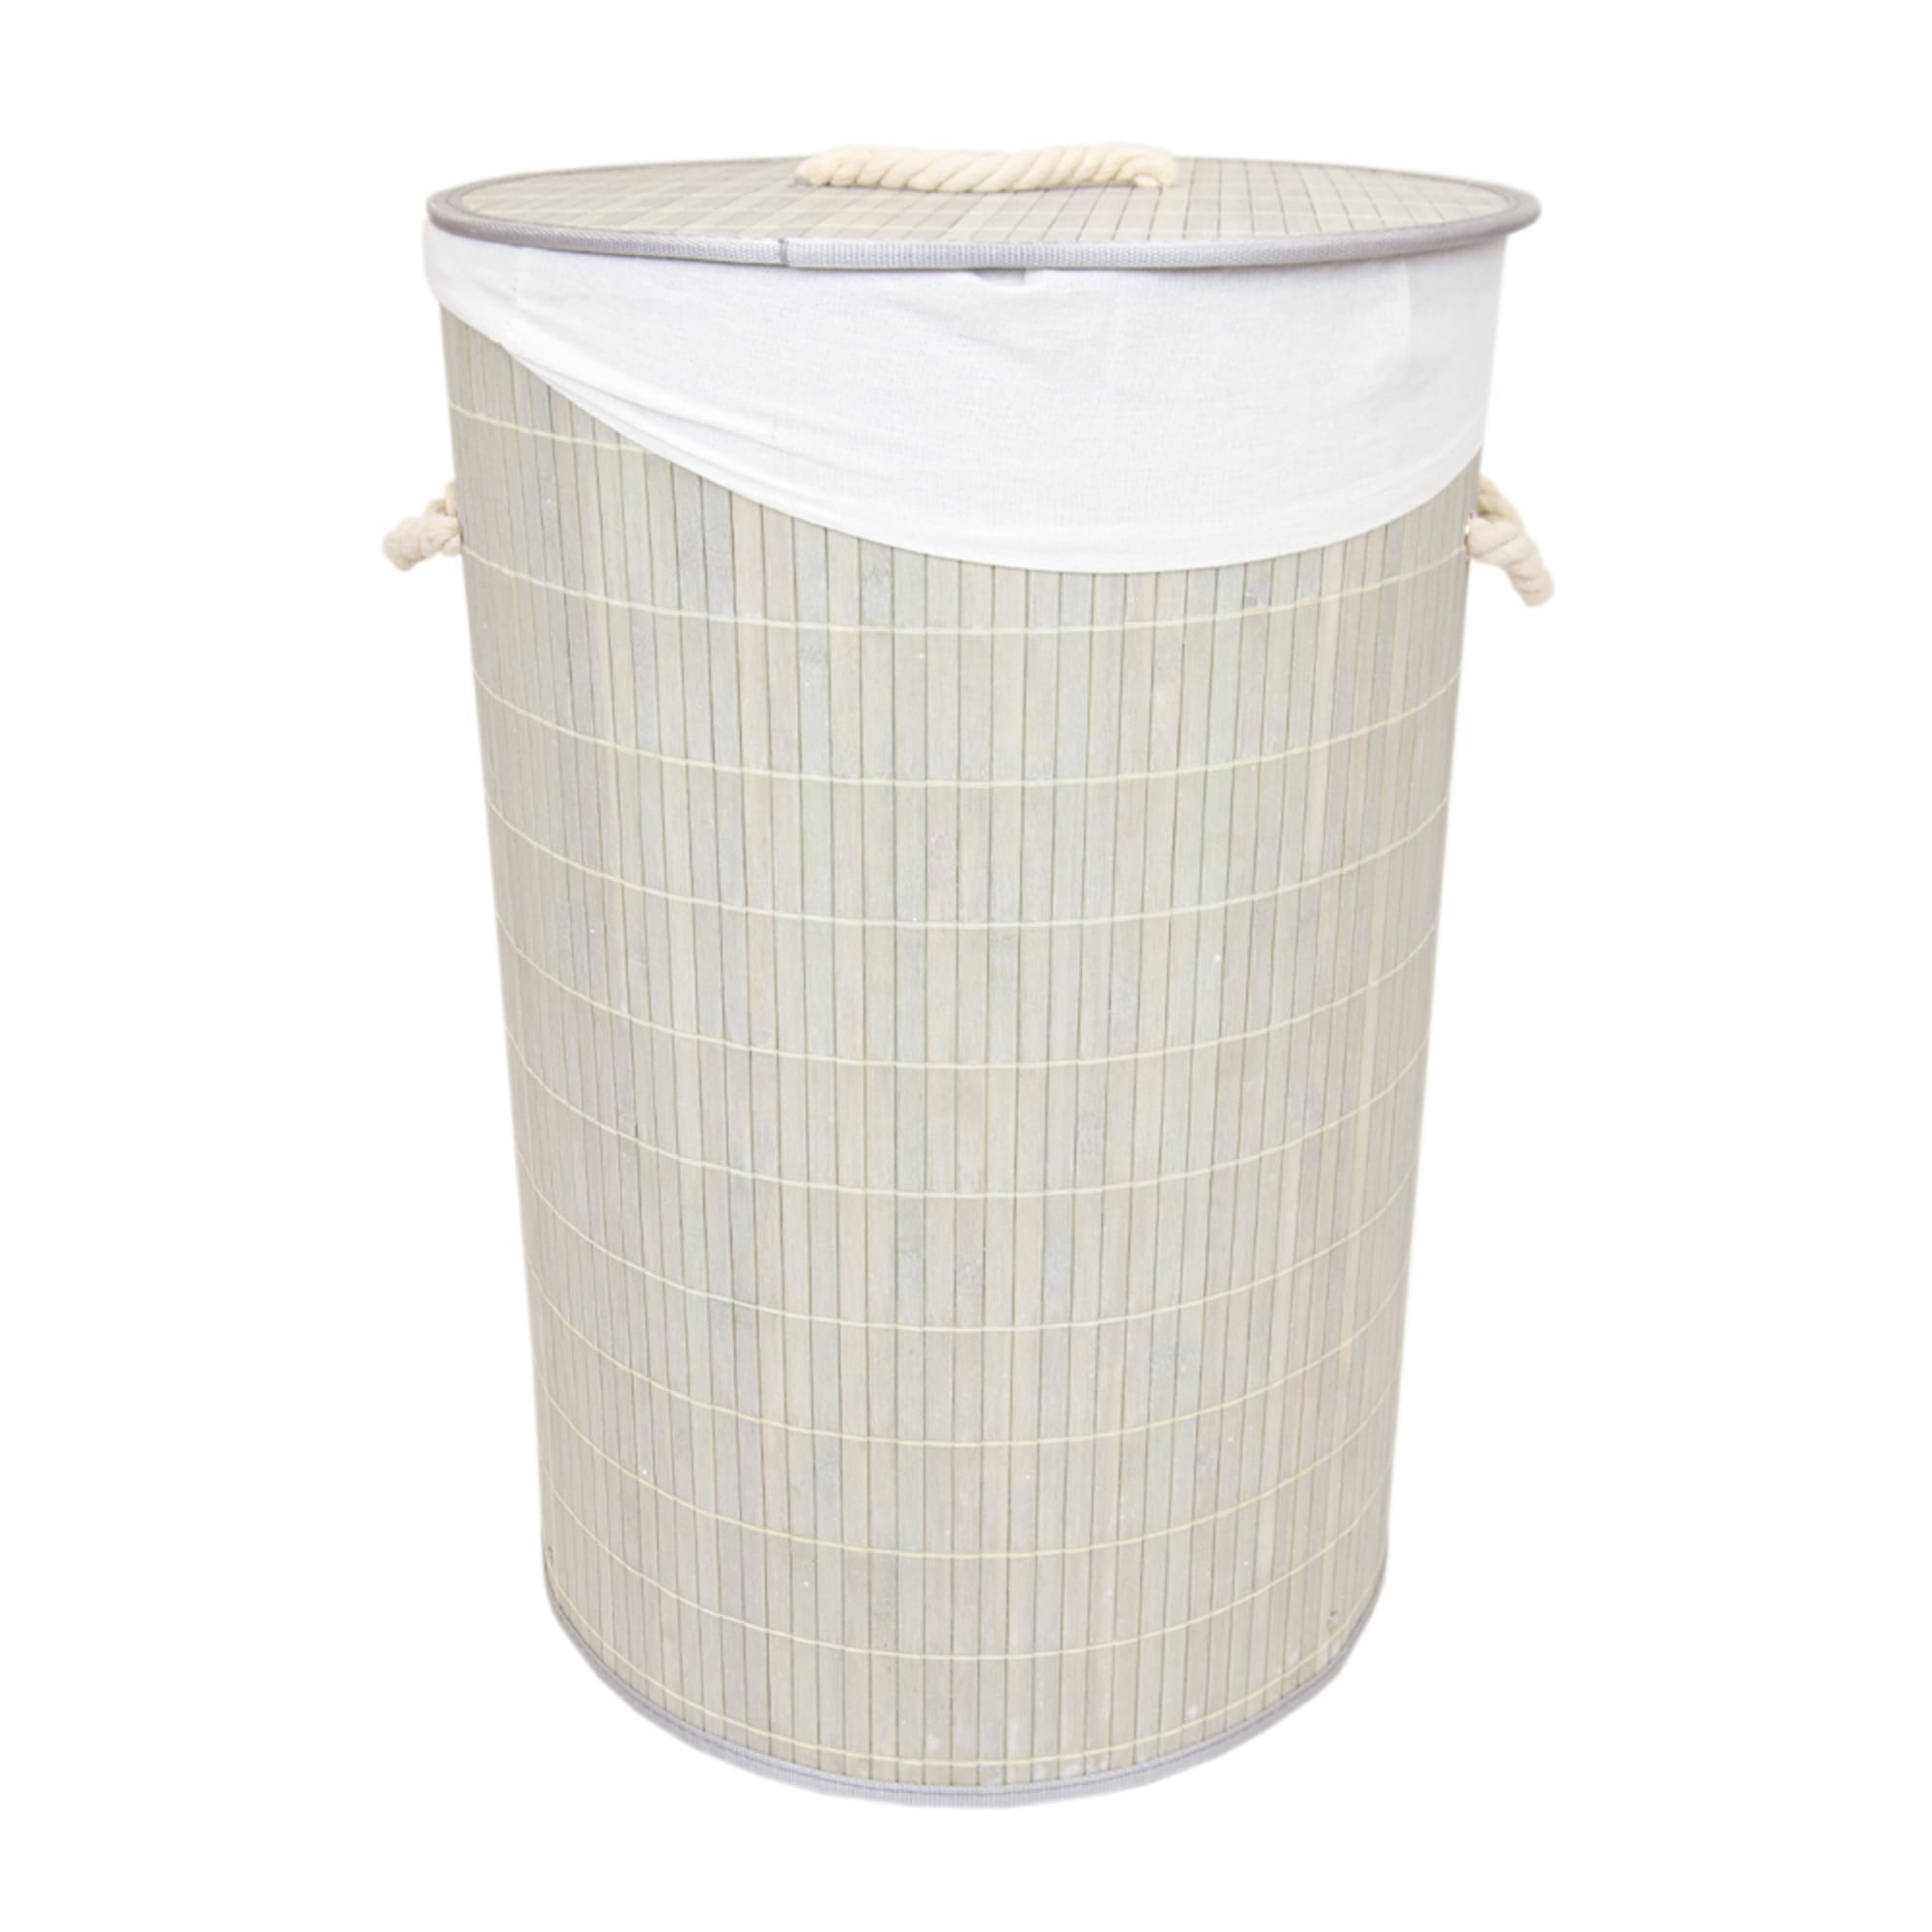 Home Basics Round Bamboo Hamper, Grey $15.00 EACH, CASE PACK OF 6